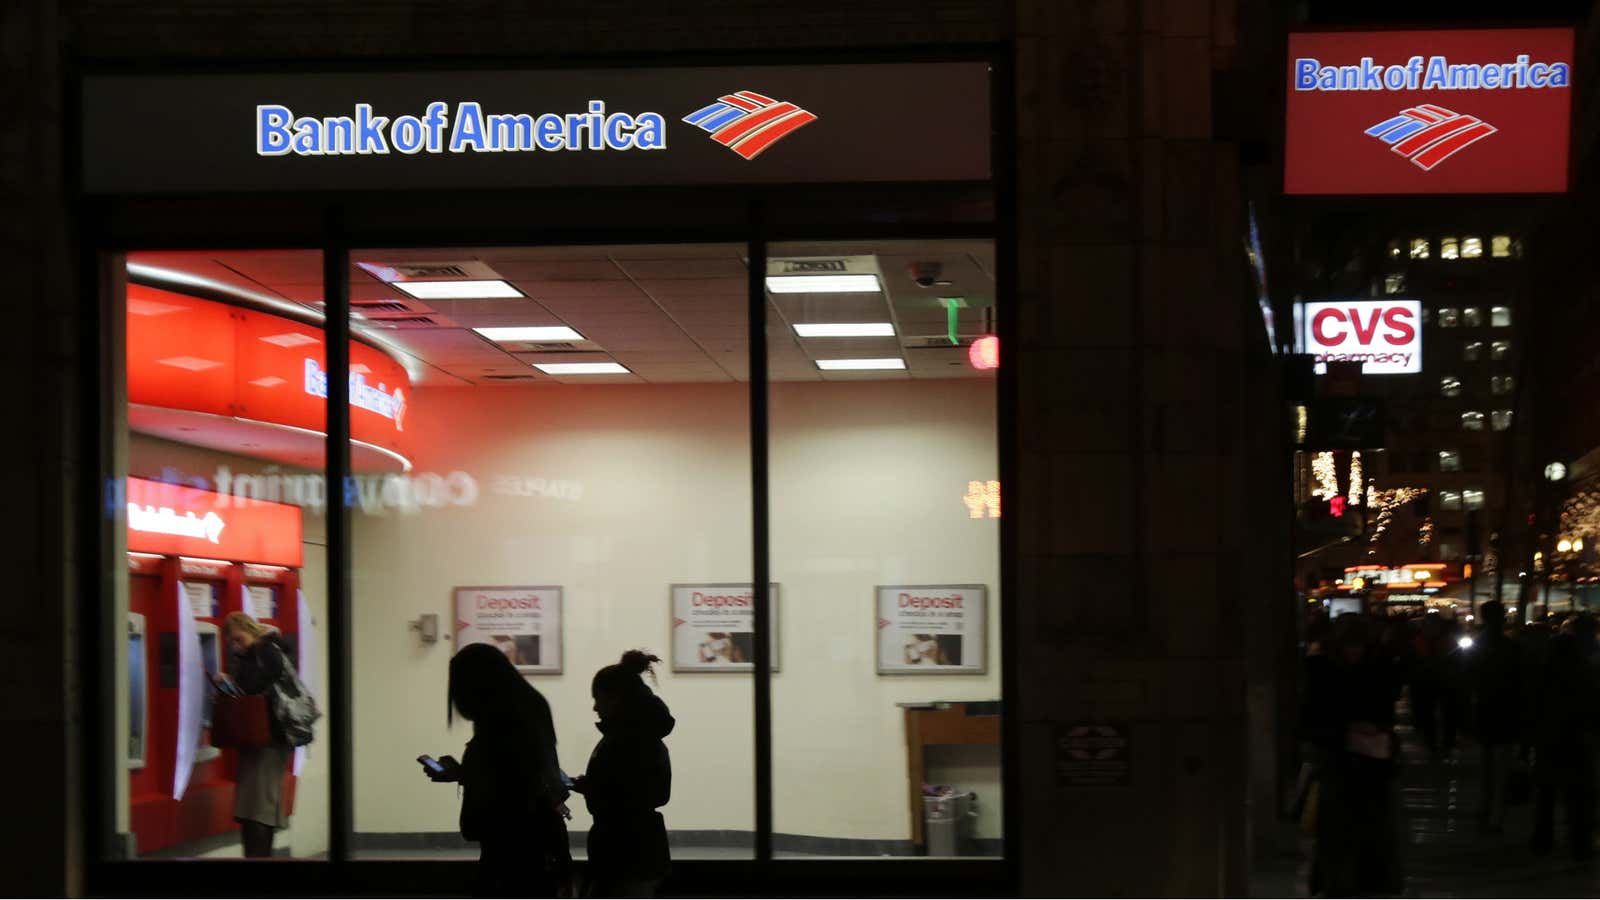 Thanks to investment banking, Bank of America had a pretty decent fourth quarter.